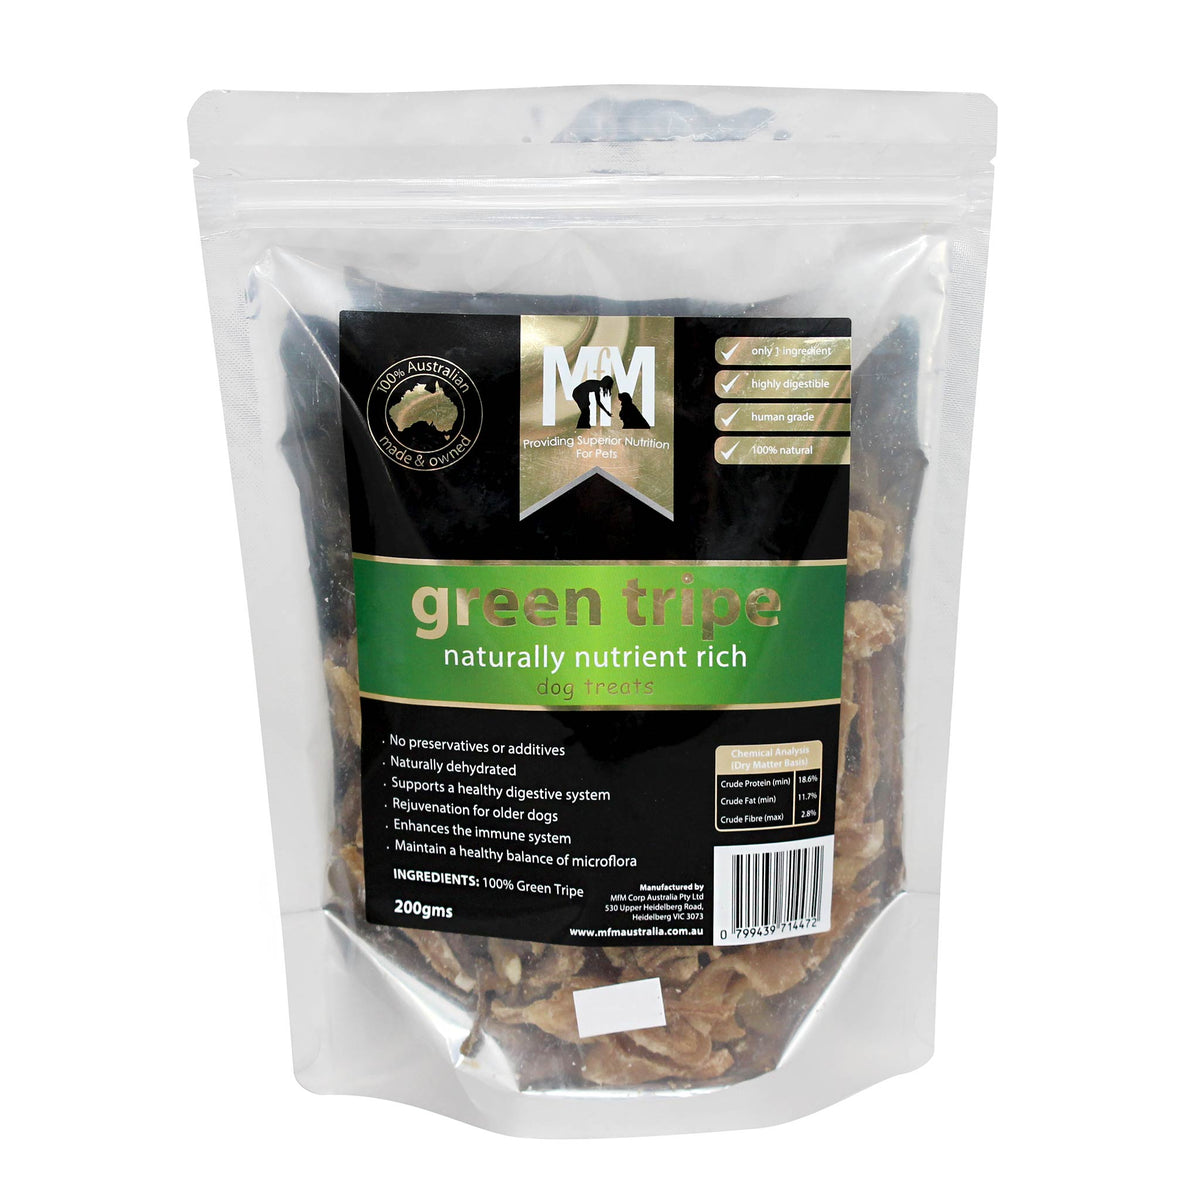 Meals for Mutts Green Tripe Dog Treats 200g